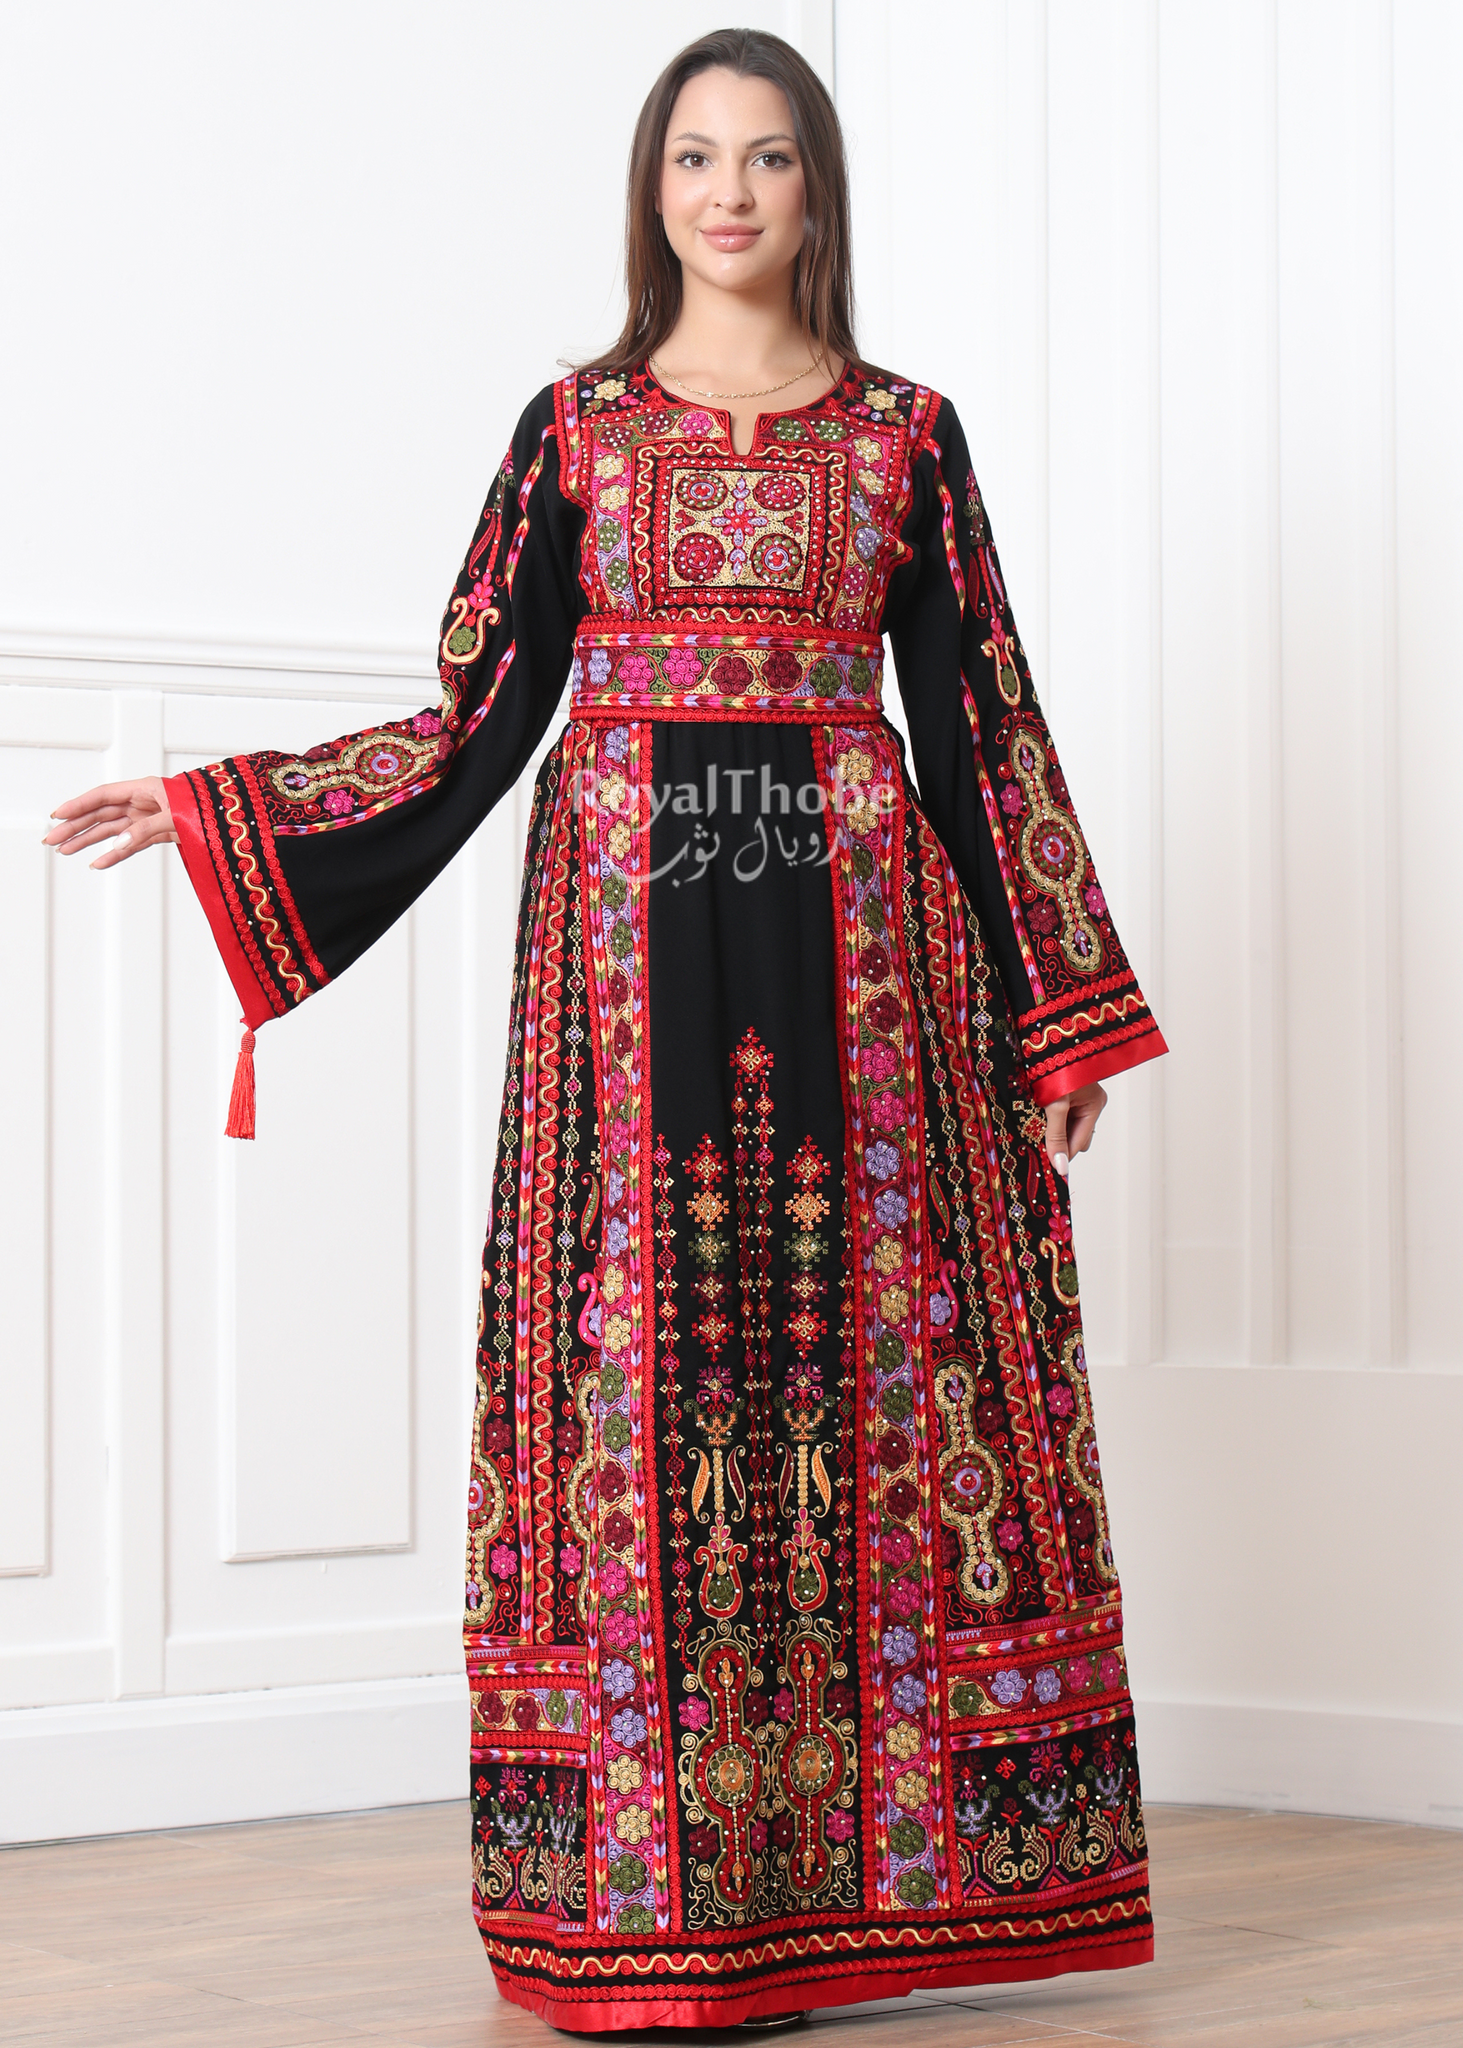 Black/Red Malak Kasab Full Embroidered Thobe With Reversible Red Satin Belt